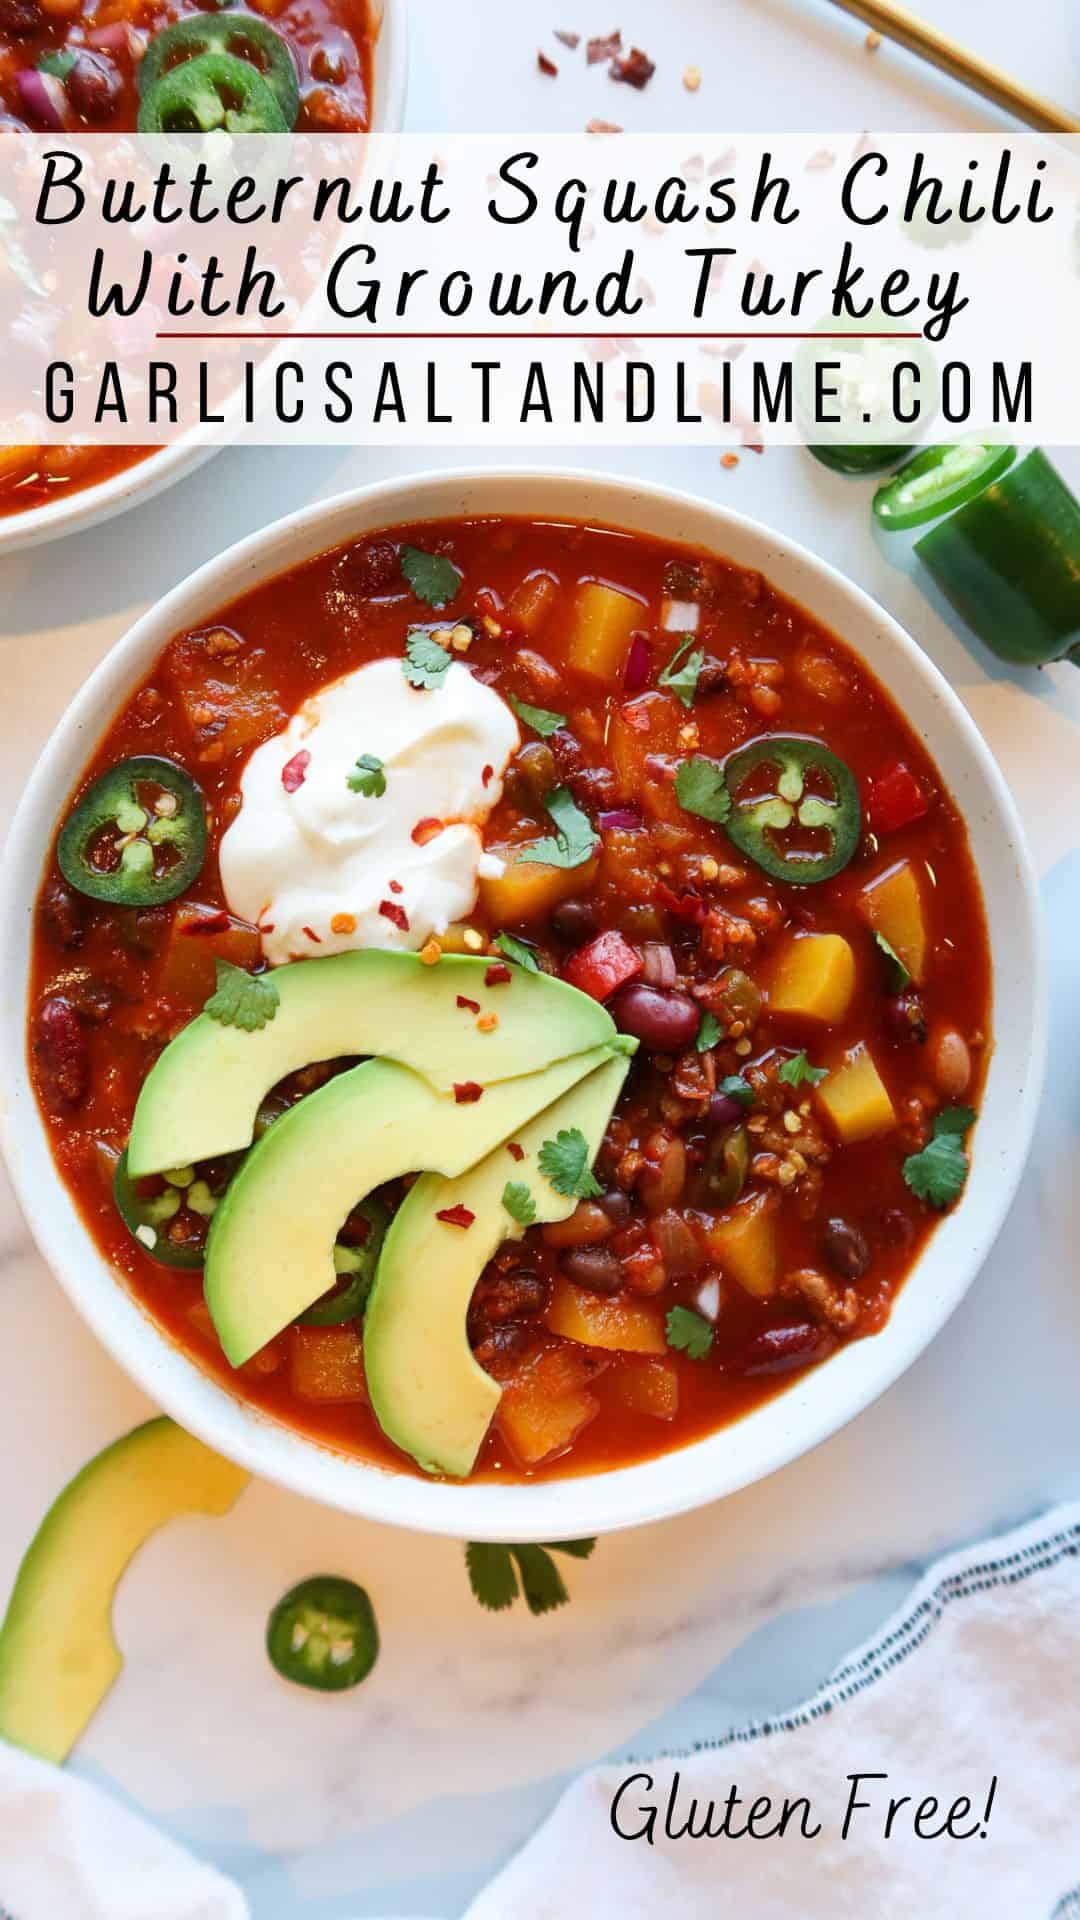 Chili in a white serving bowl with toppings and text overlay for Pinterest.